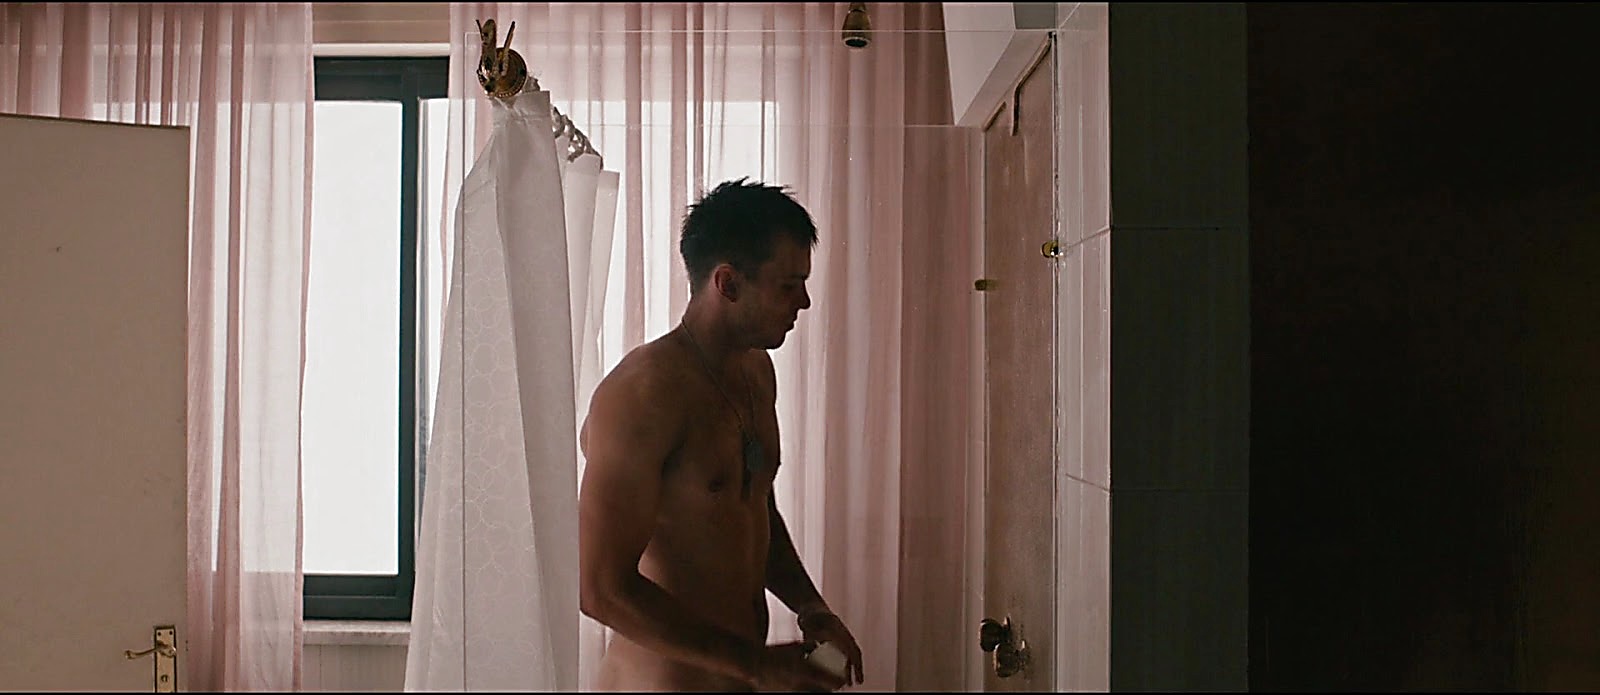 Nicholas Hoult sexy shirtless scene April 22, 2017, 1pm